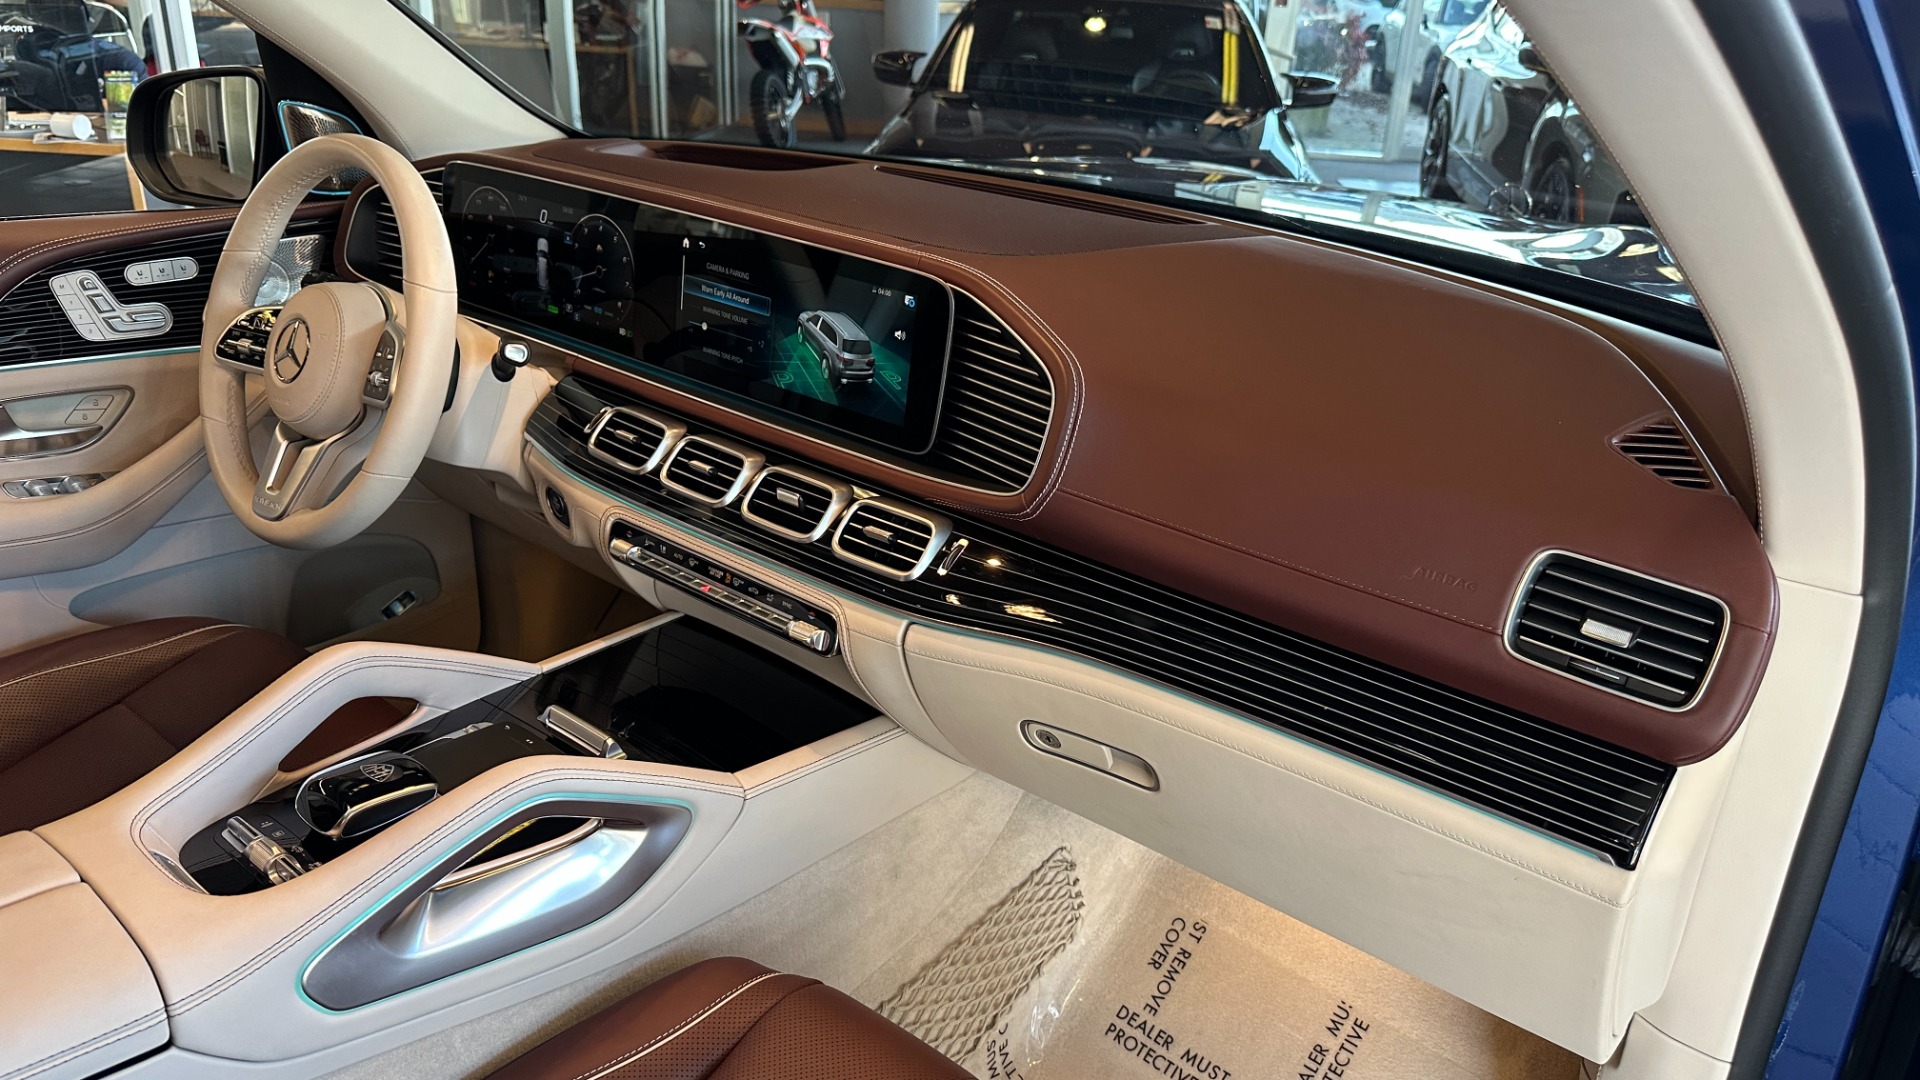 Used 2021 Mercedes-Benz GLS MAYBACH GLS600 / 23IN WHEELS / PIANO BLACK TRIM / CHAMPAGNE FRIDGE for sale $216,995 at Formula Imports in Charlotte NC 28227 36